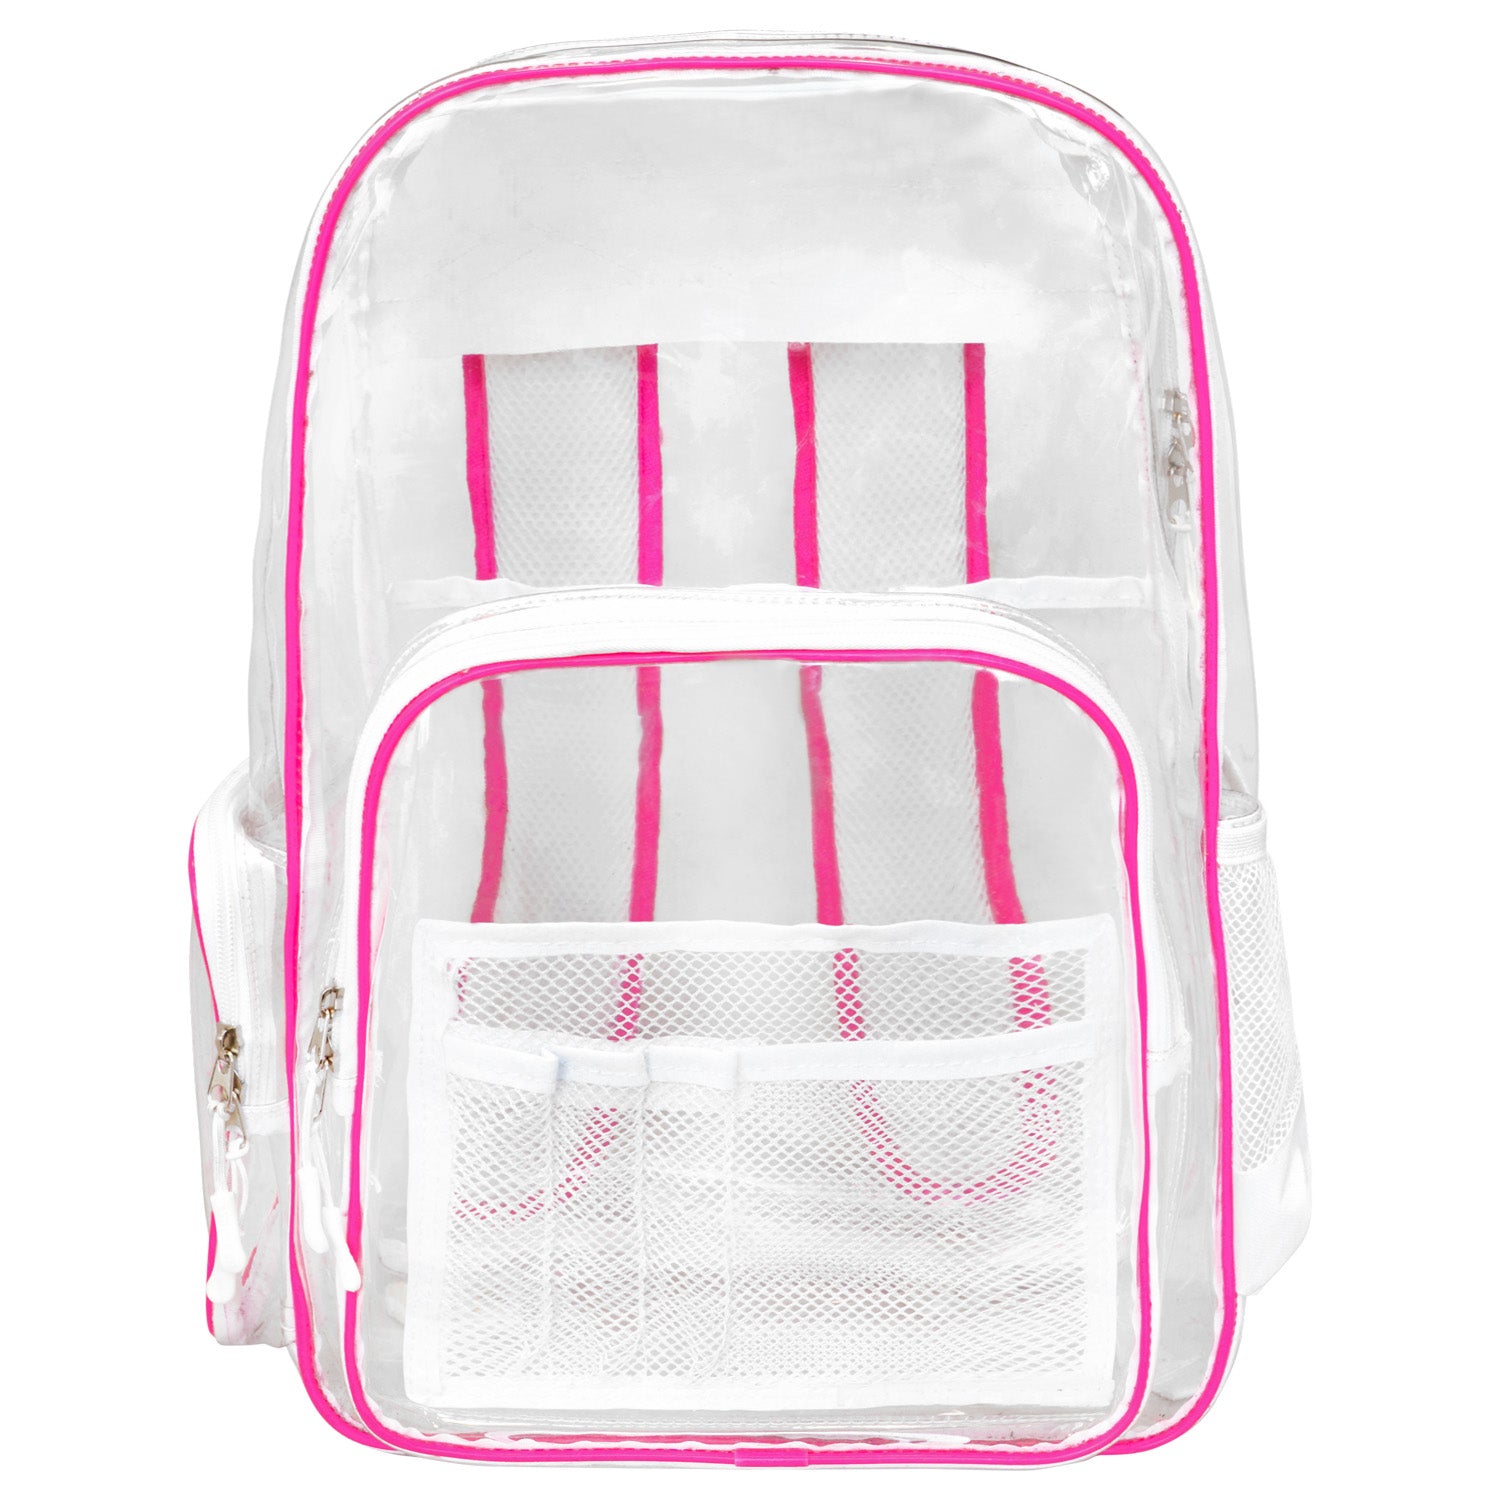 Meister All-Access Clear Backpack - Pink / White